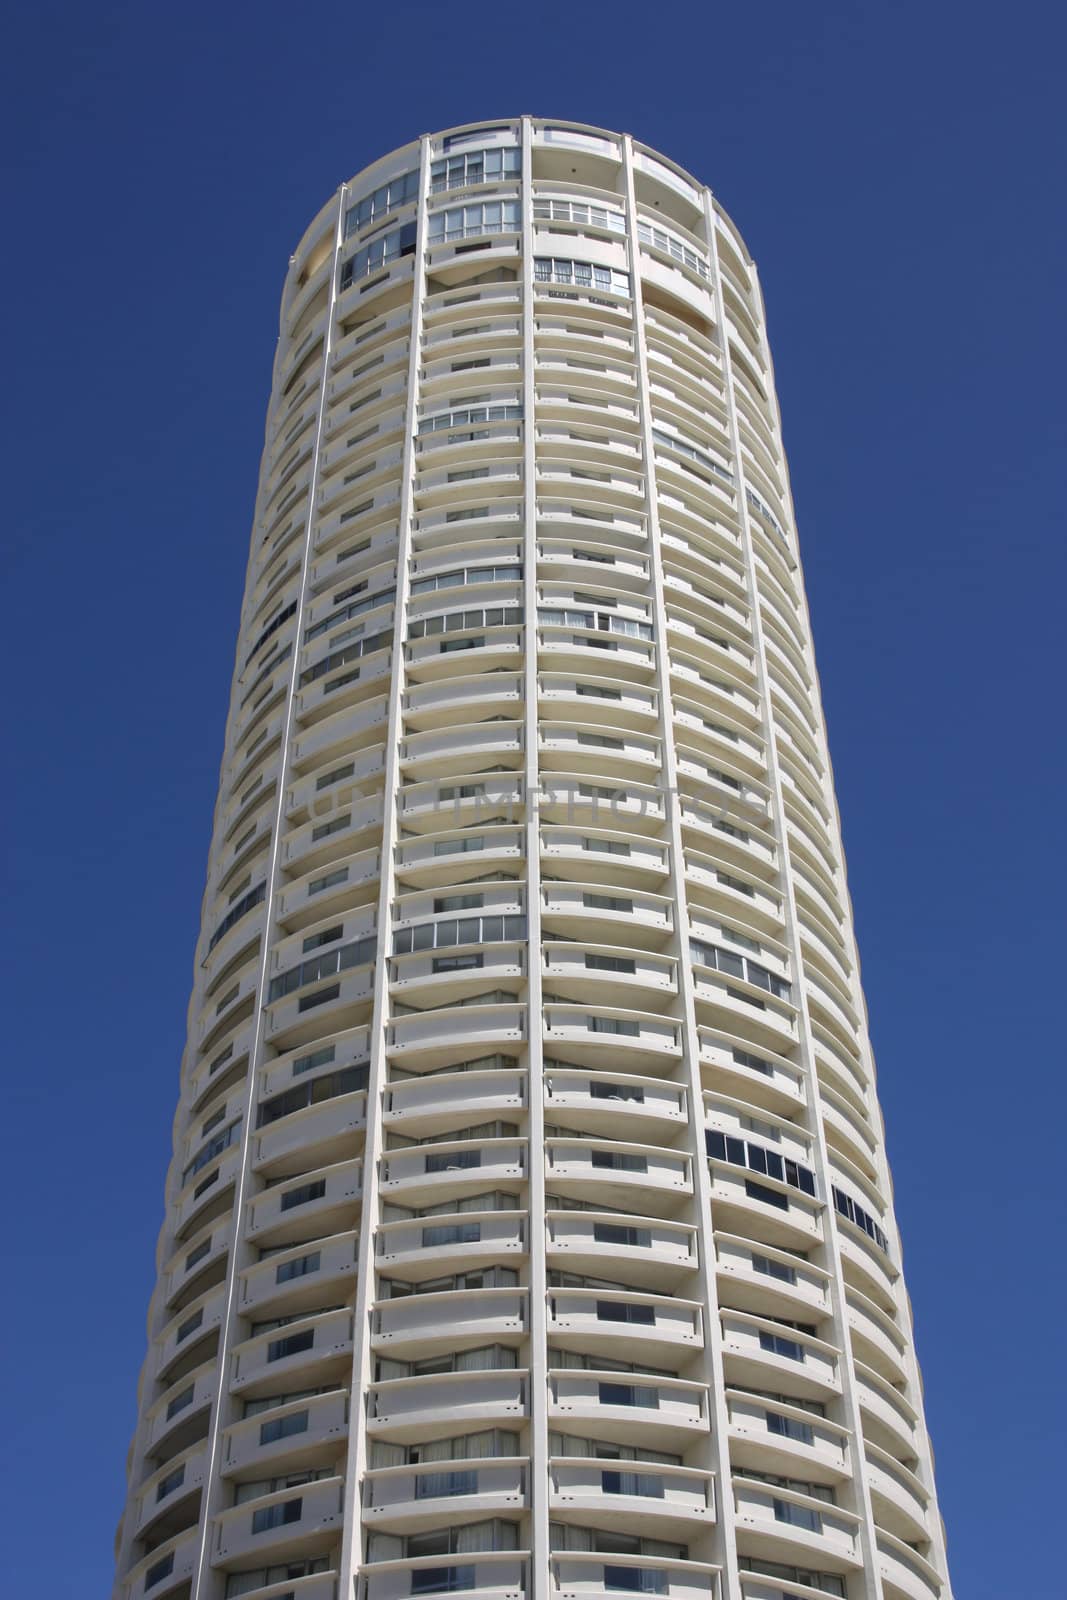 Rounded apartment building. Modern residential architecture in Gold Coast, Queensland, Australia.